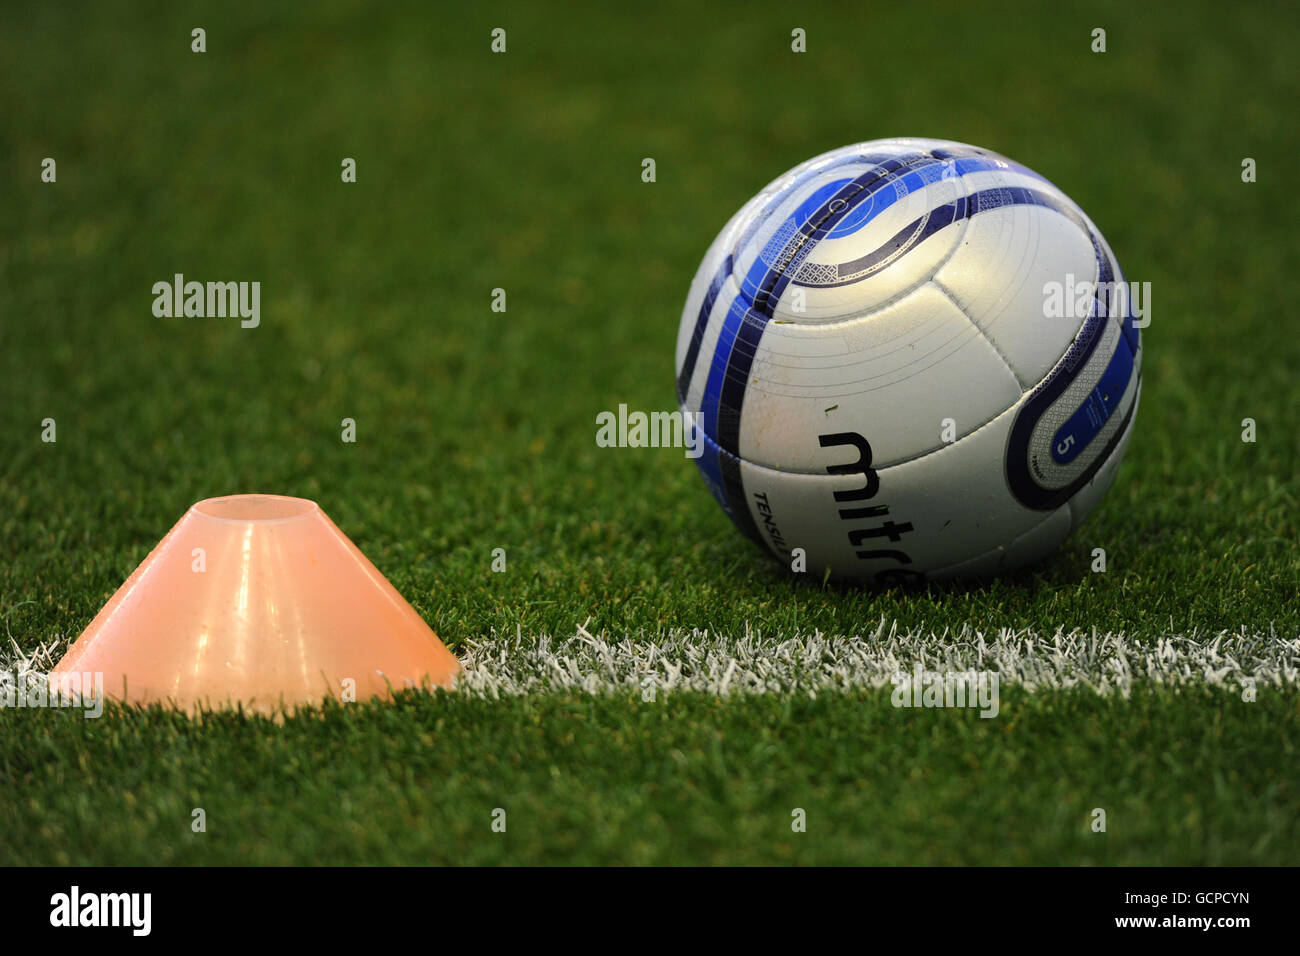 Soccer - npower Football League Championship - Leicester City v Cardiff City - Walkers Stadium. Detail of a training cone and match ball on the pitch Stock Photo